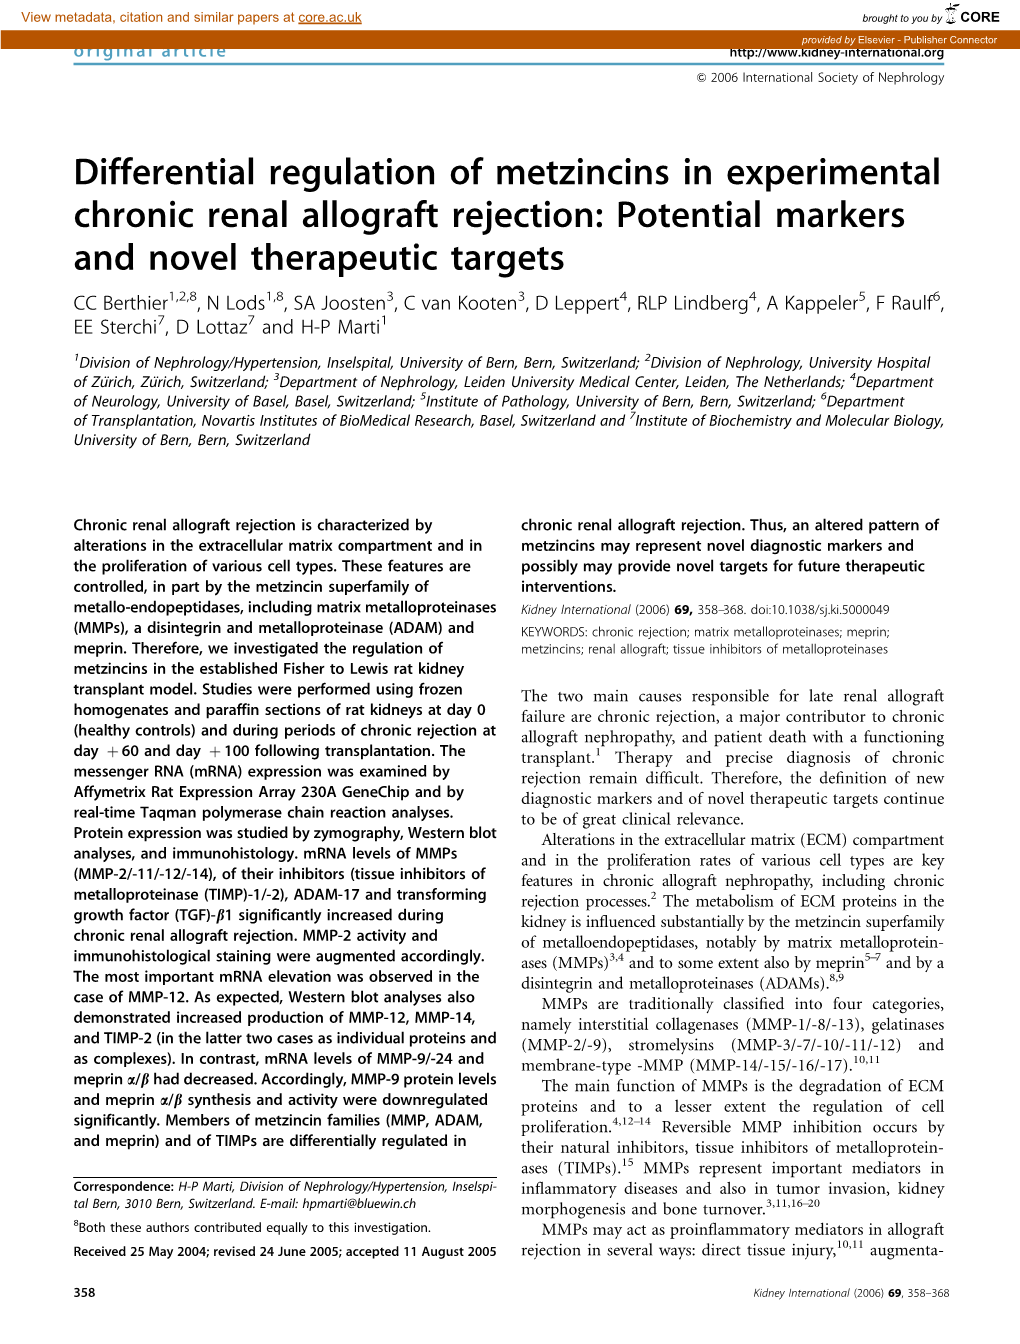 Differential Regulation of Metzincins in Experimental Chronic Renal Allograft